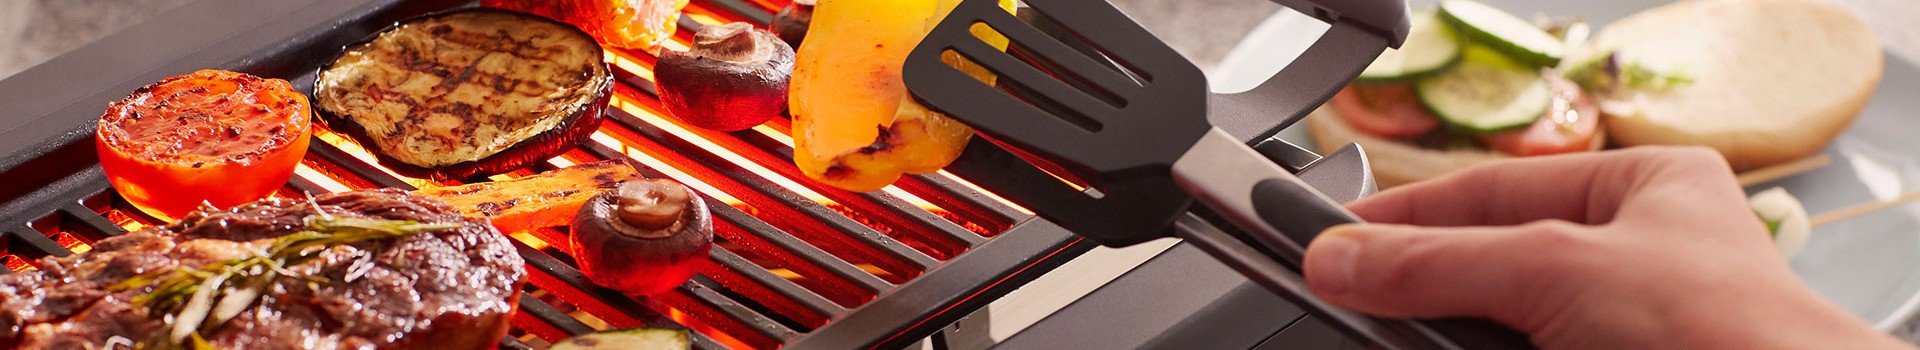 Electric barbecues at barbecueportugal.com